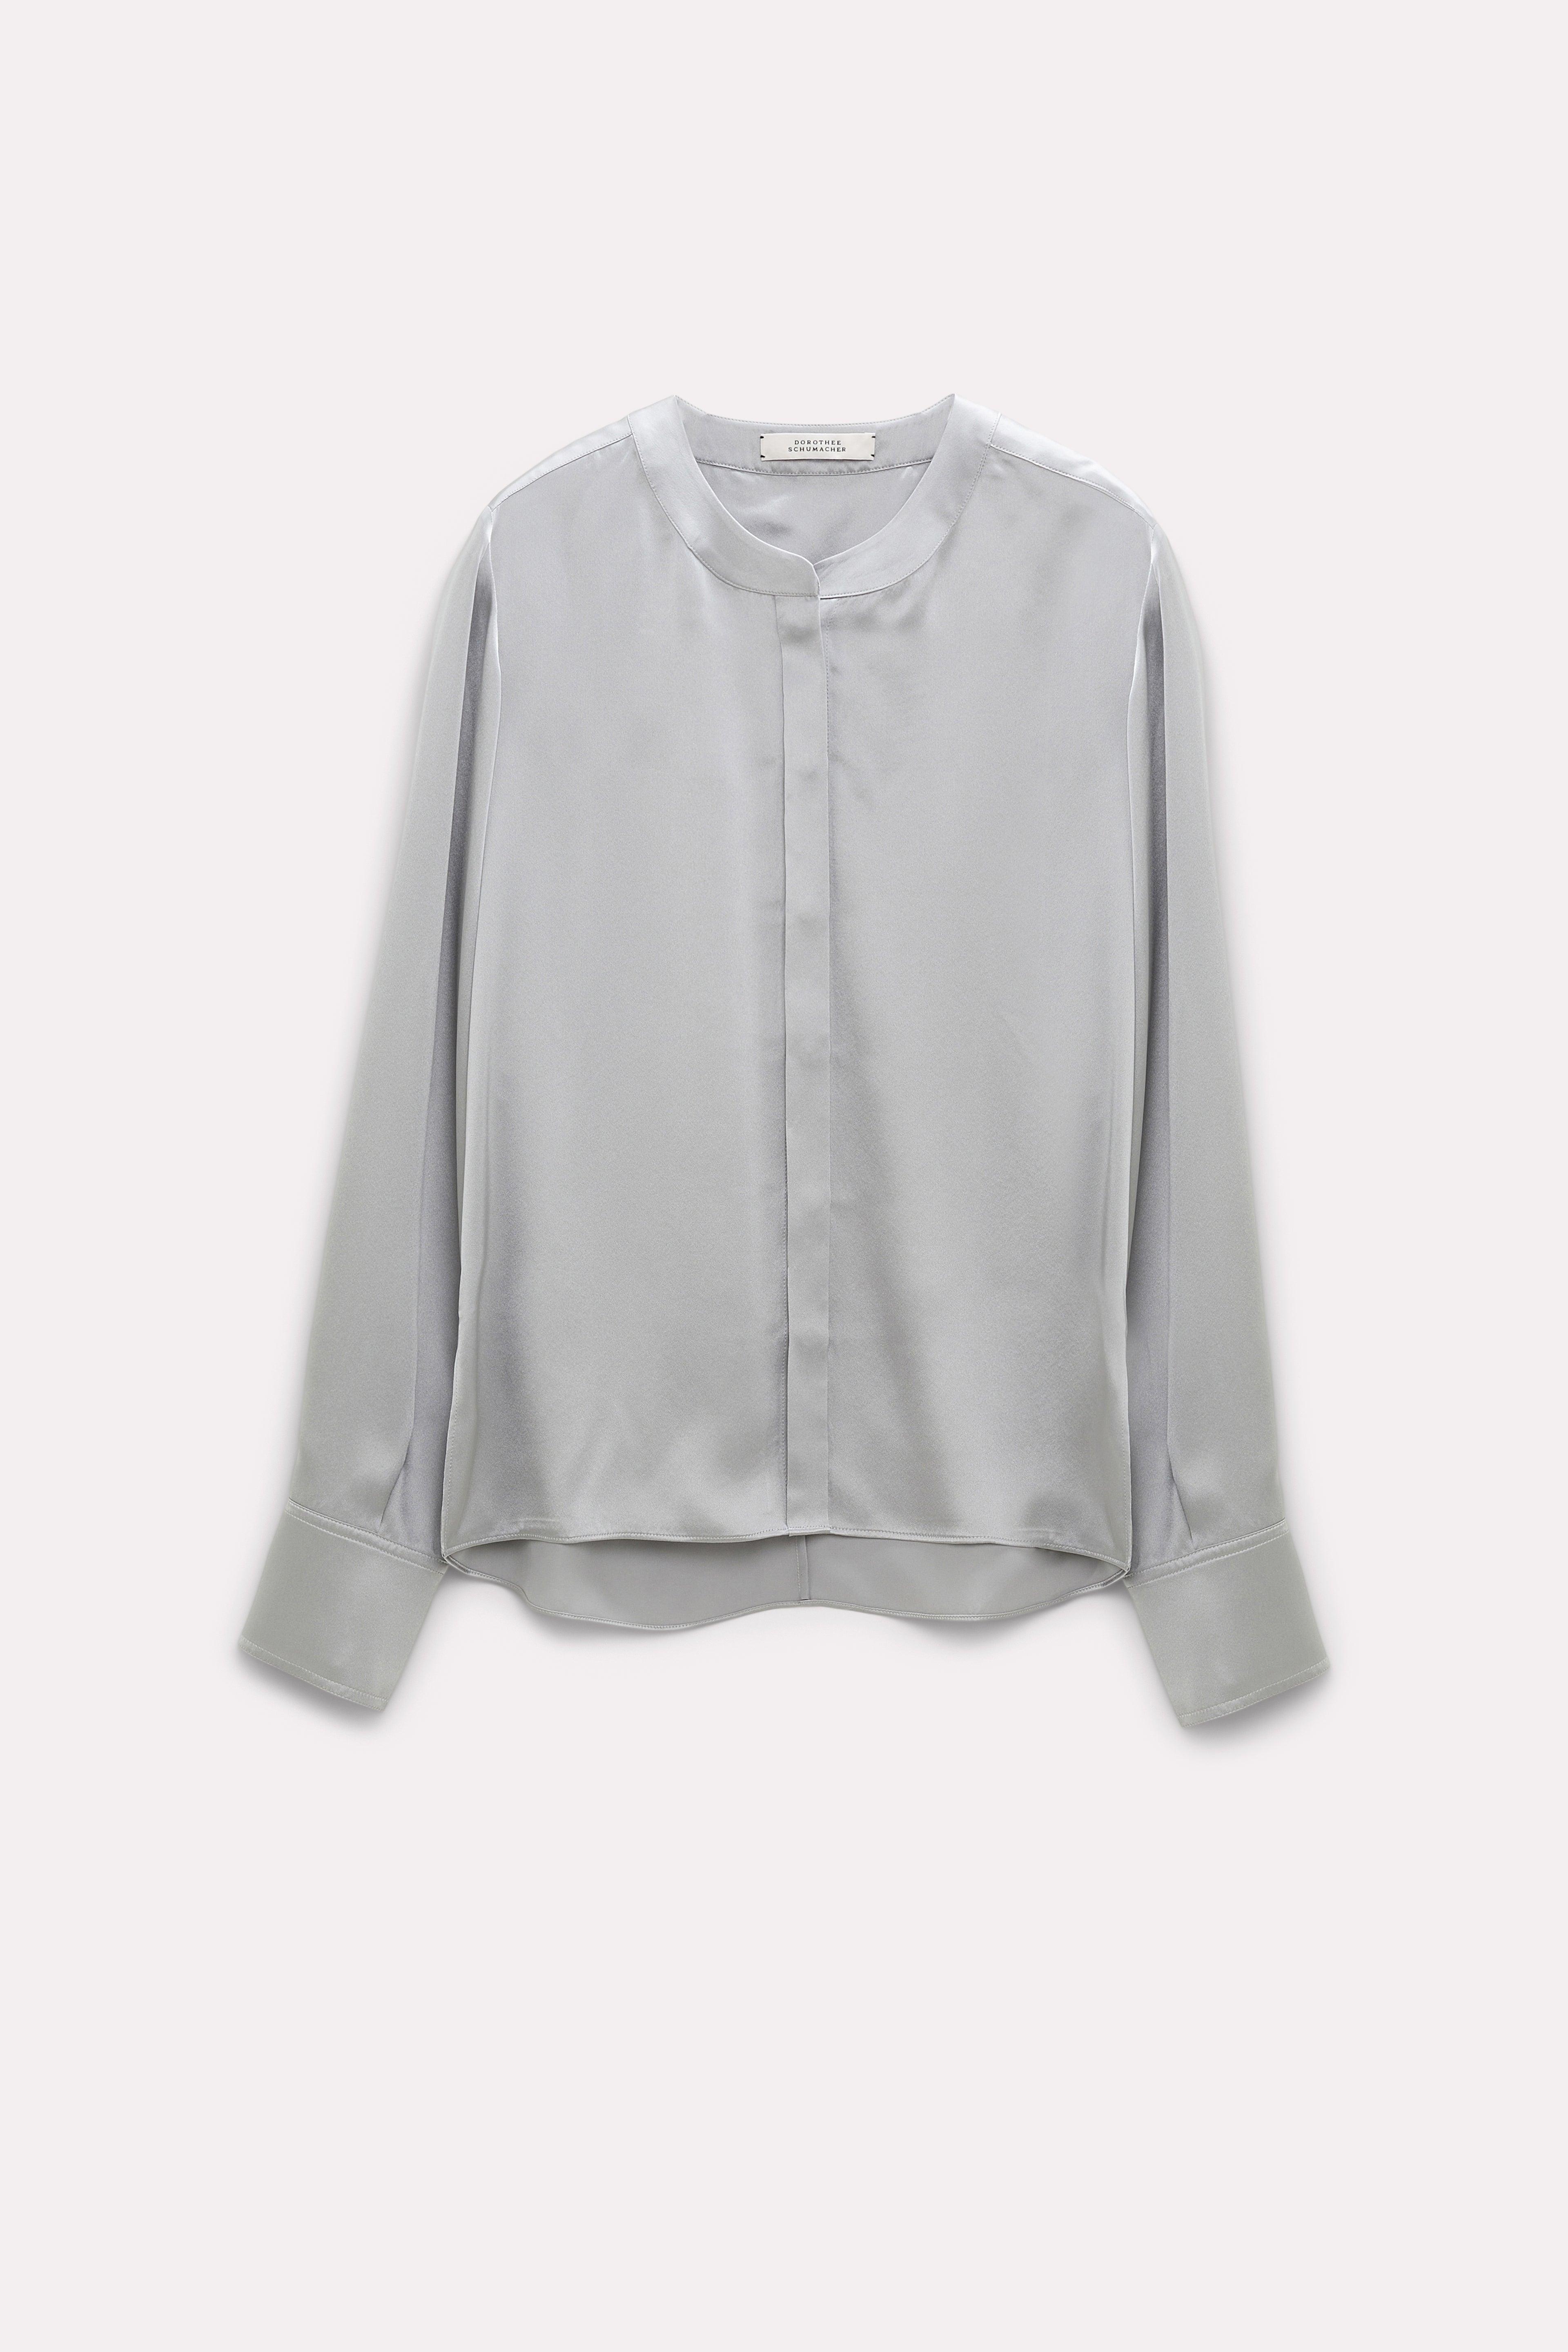 Dorothee-Schumacher-OUTLET-SALE-SLEEK-ATTRACTION-blouse-Blusen-ARCHIVE-COLLECTION_b5174836-b623-4bf5-bfad-fdf35b86431e.jpg